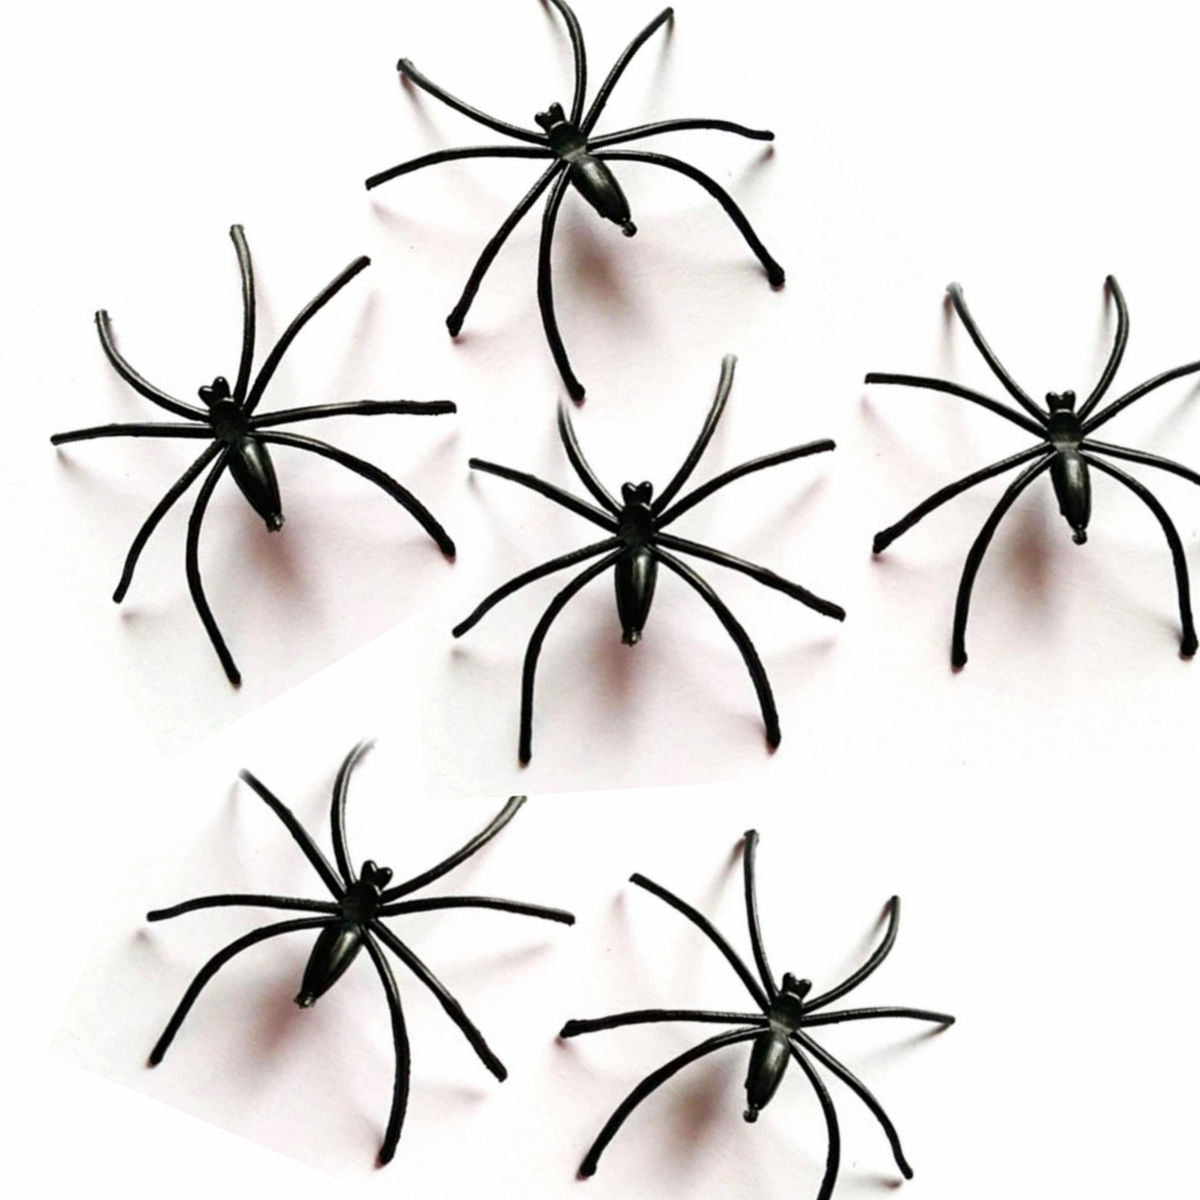 Spiders Infestation Pack of 50 Plastic Creepy Spiders Halloween Decoration